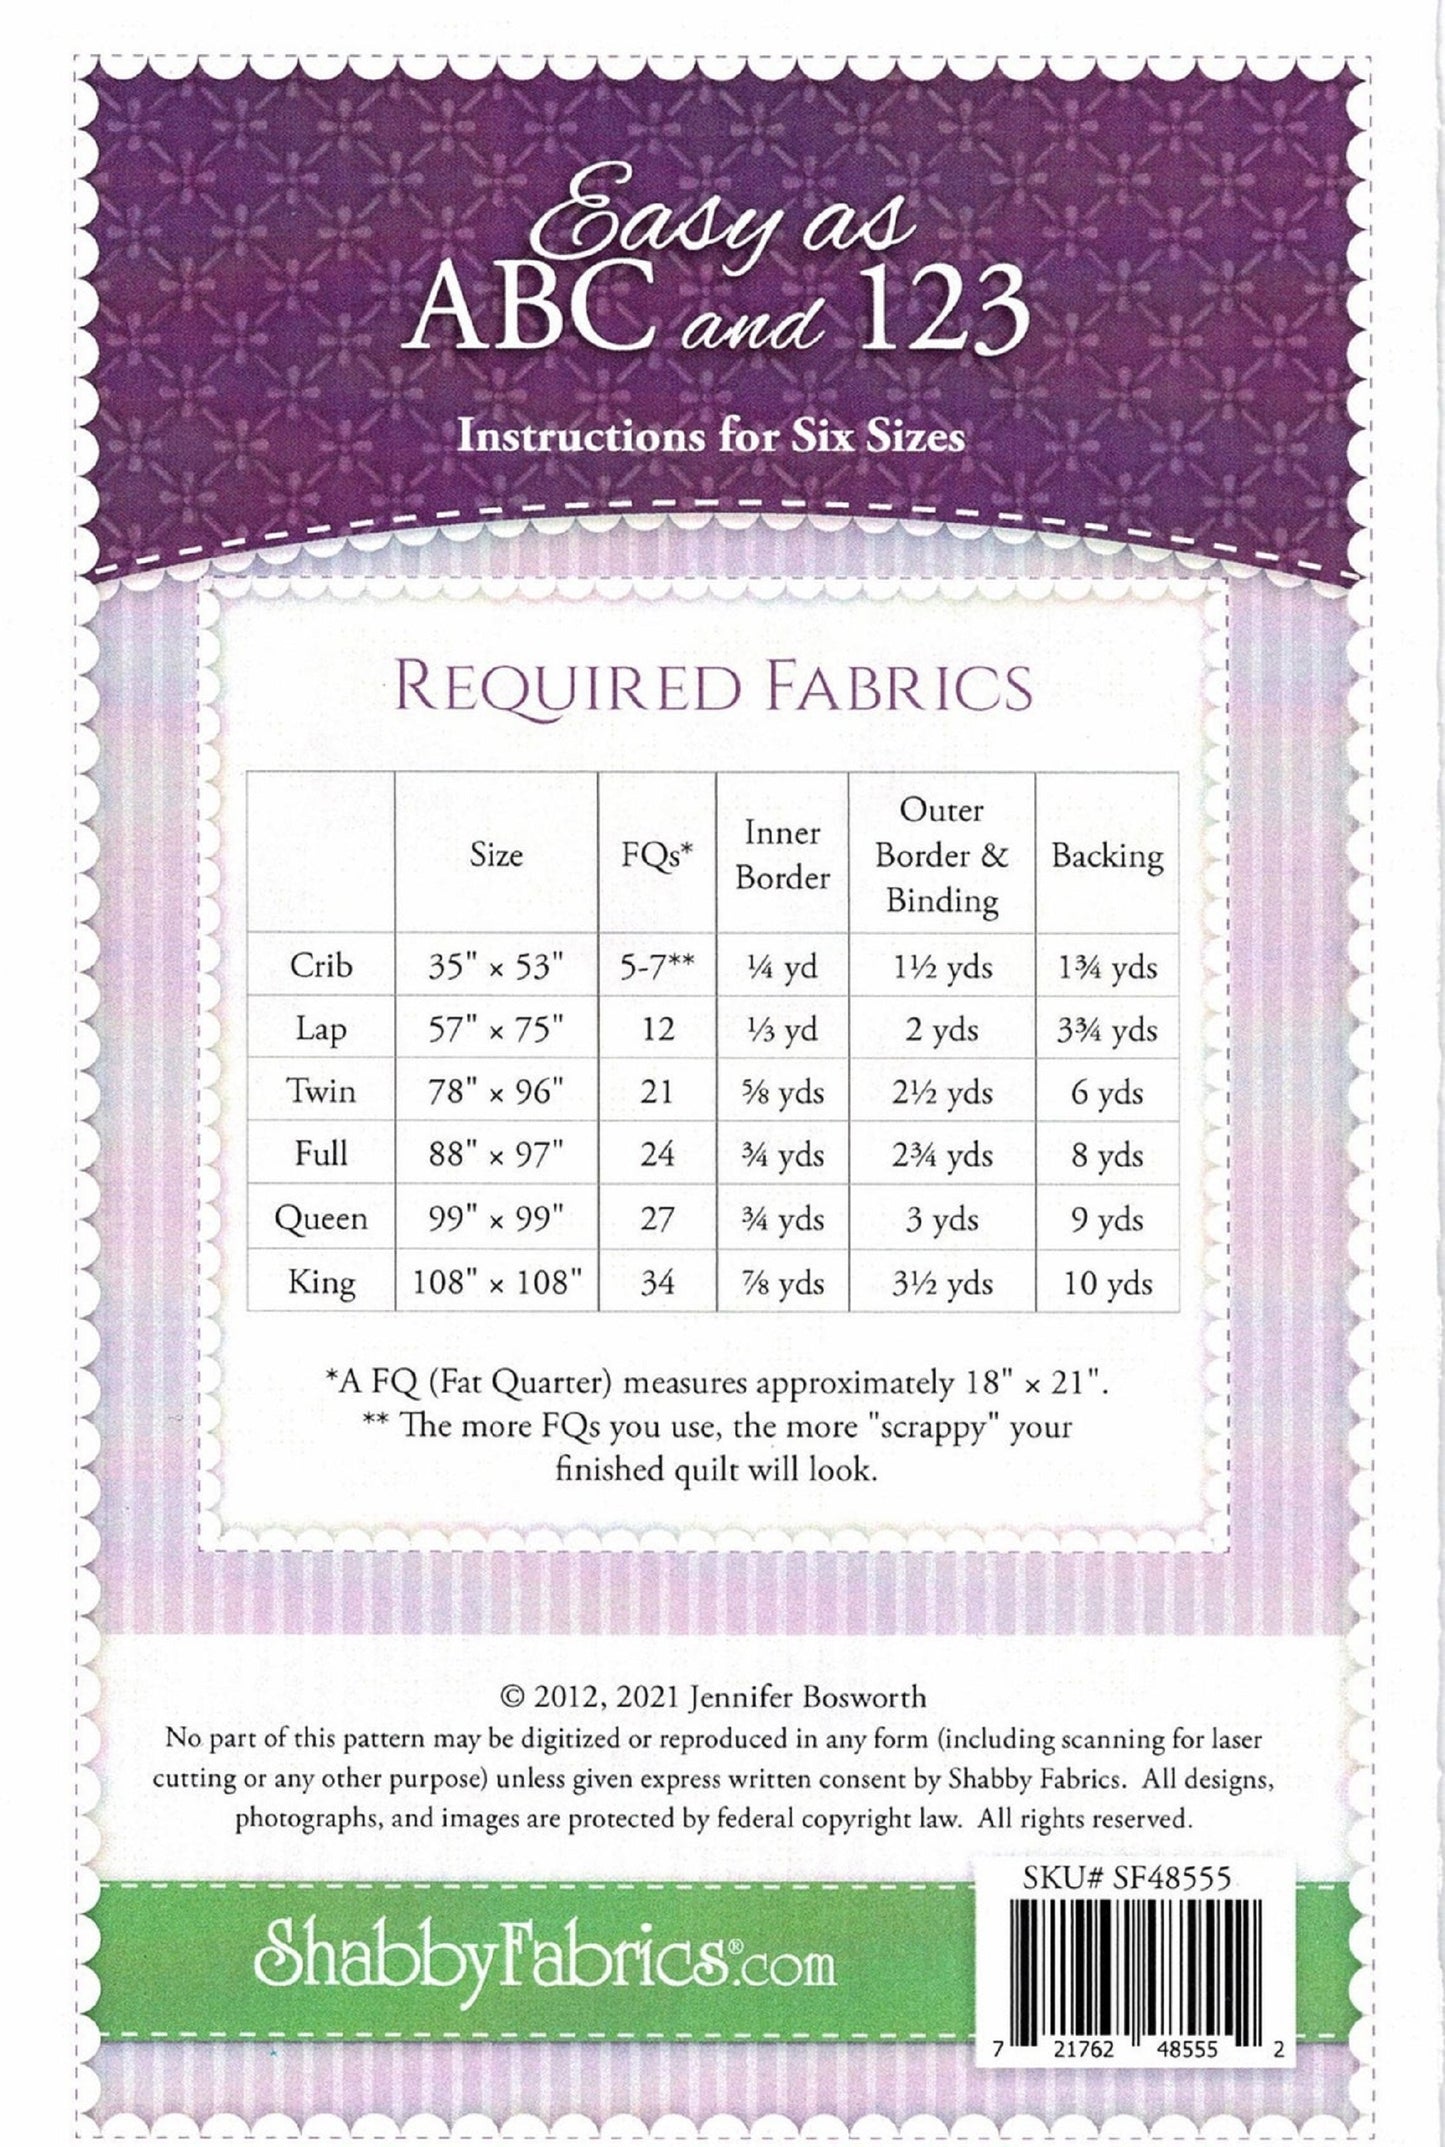 Easy as ABC and 123 Quilt Pattern by Shabby Fabrics